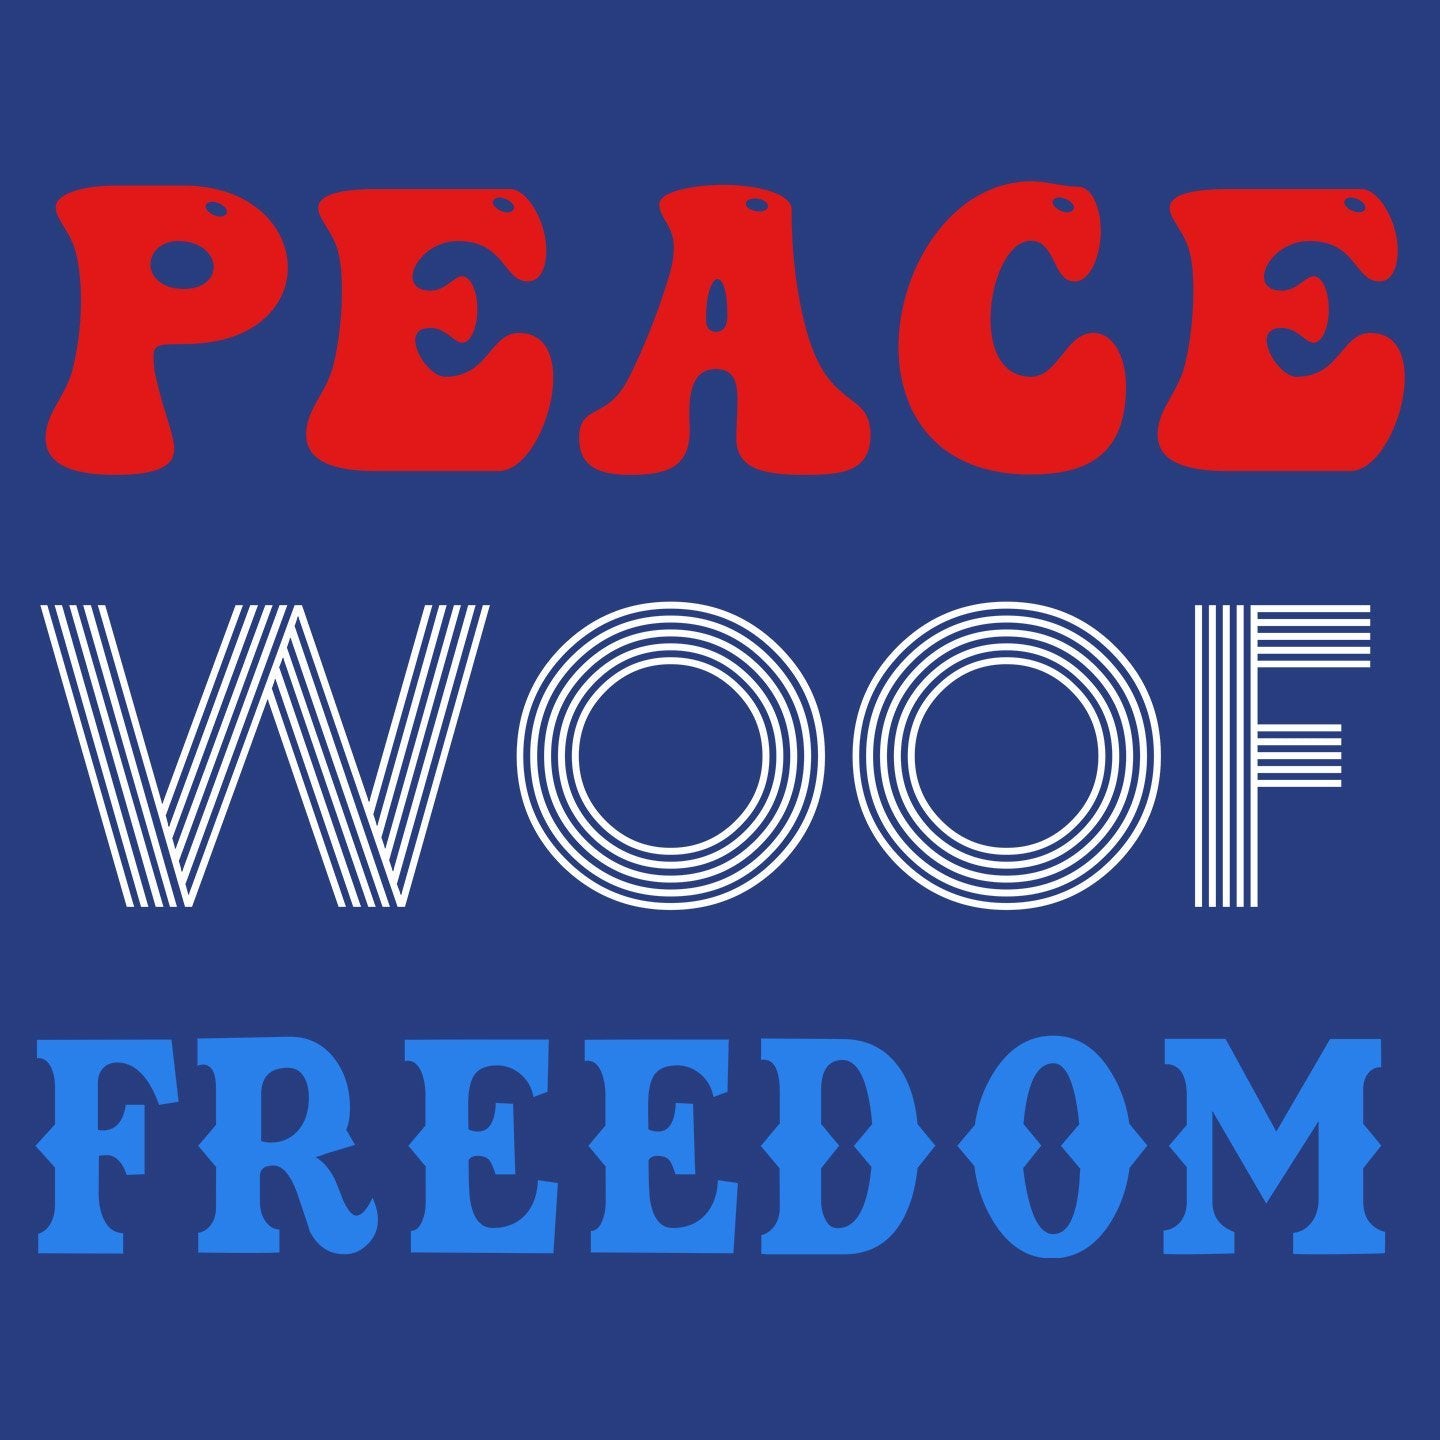 Peace Woof Freedom - Women's Fitted T-Shirt